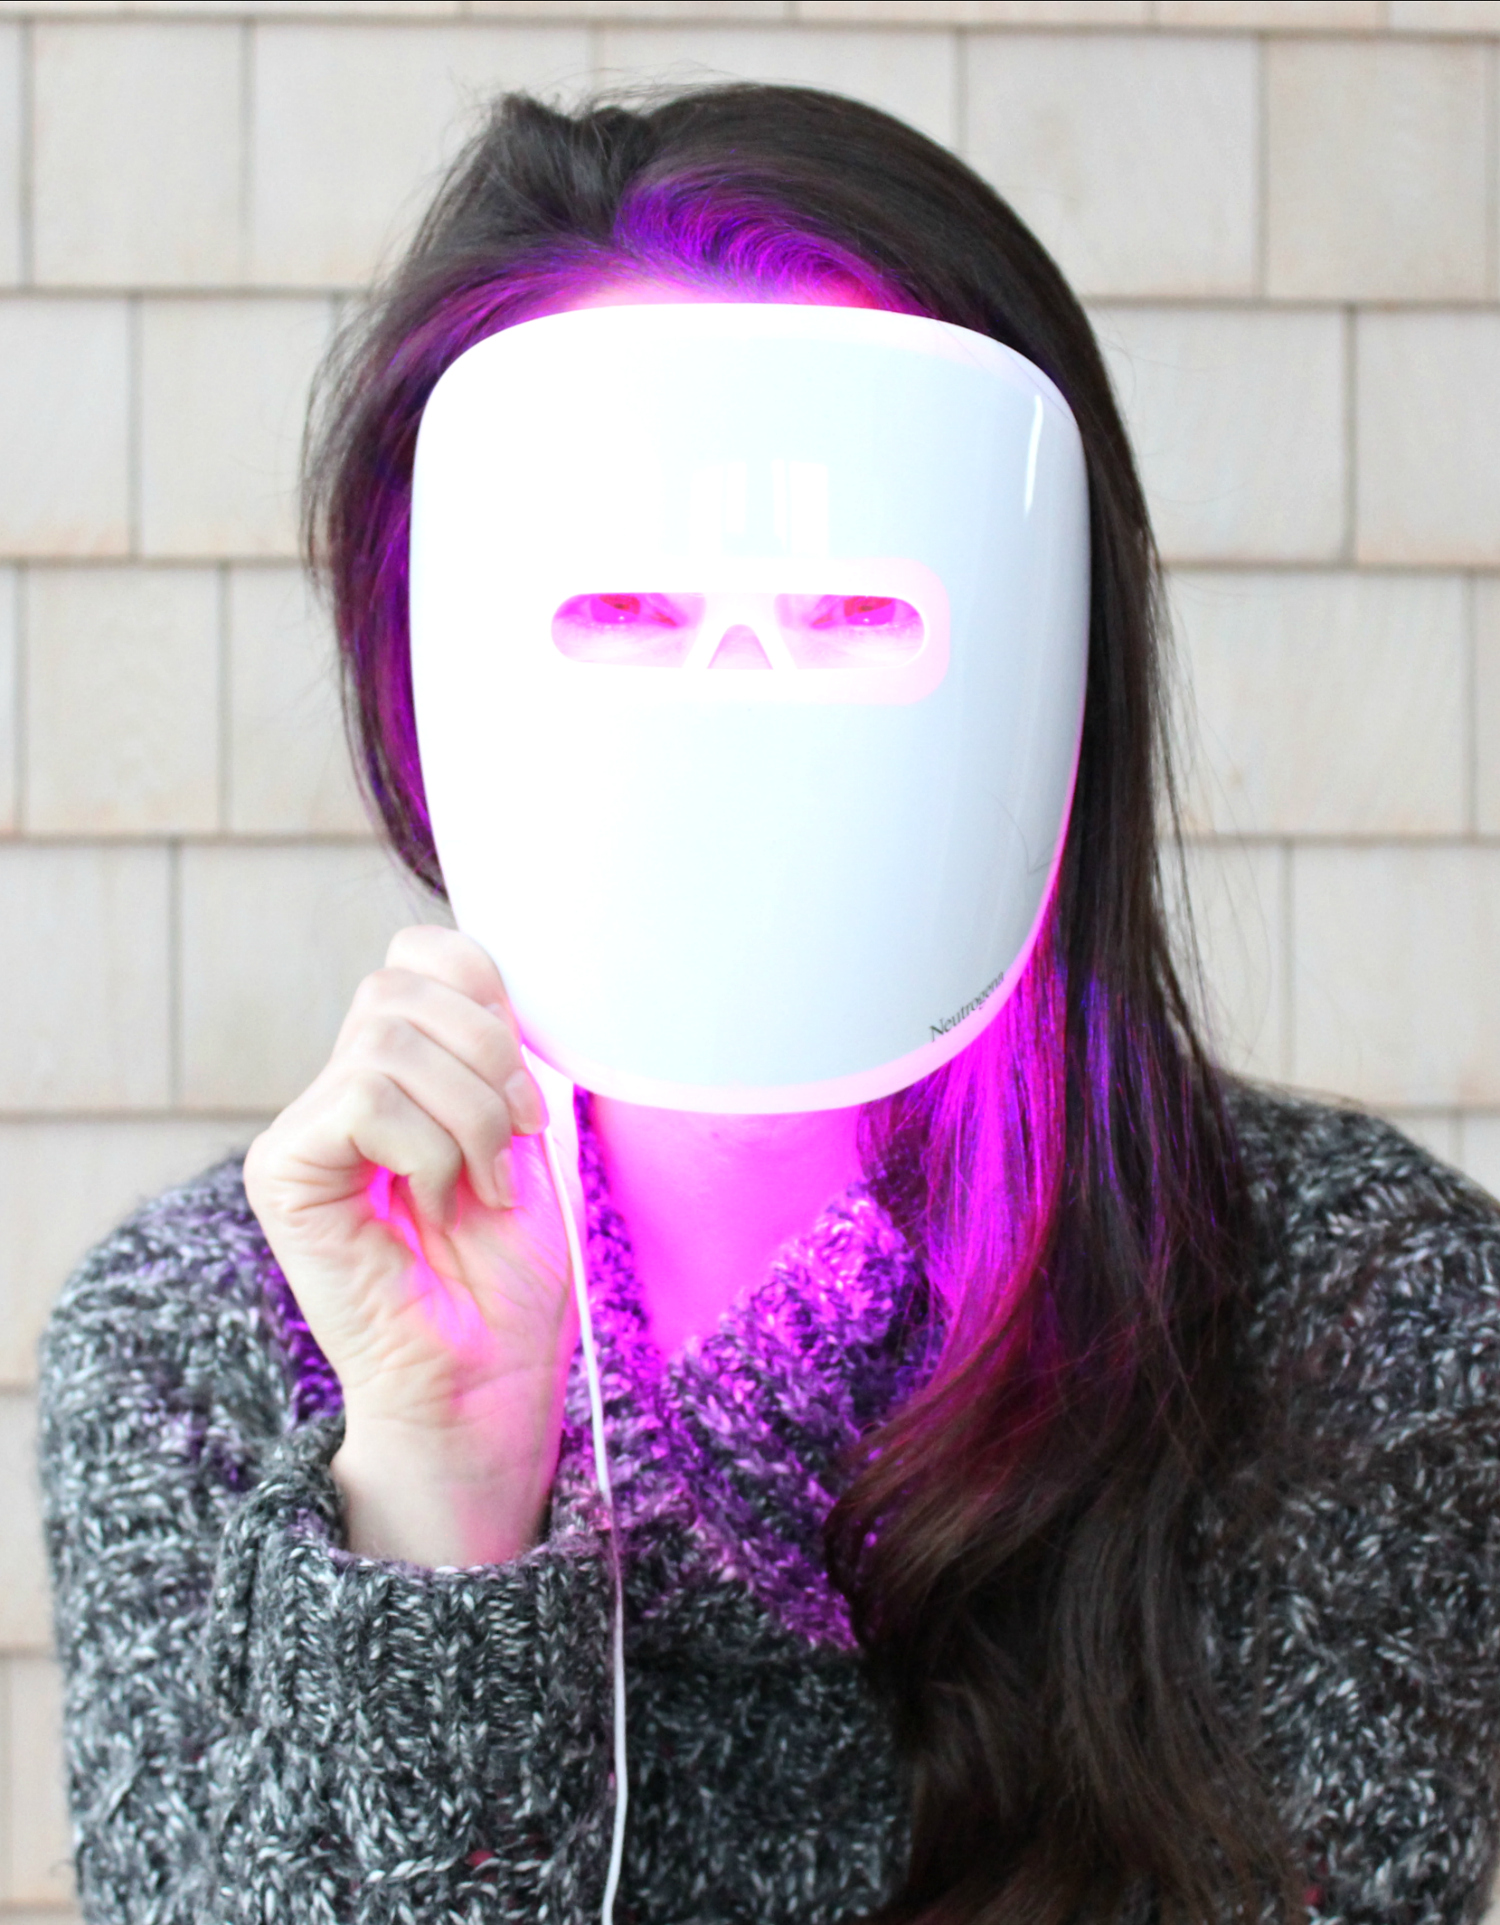 Benefits of light therapy for acne when using the new Neutrogena Light Therapy Acne Treatment Mask